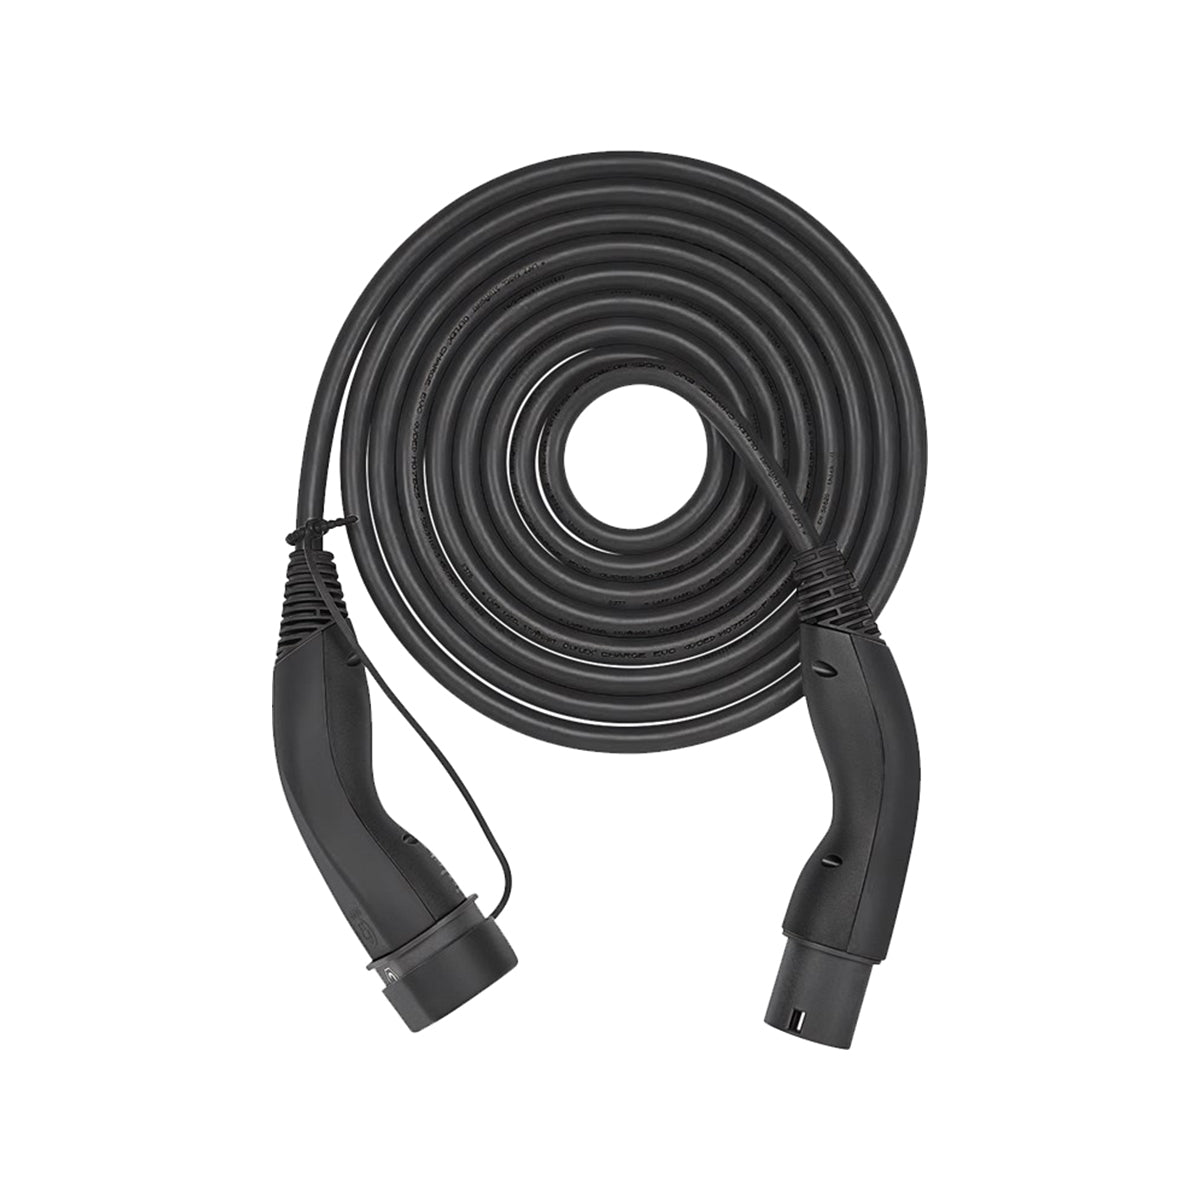 LAPP EV Helix Charge Cable Type 2 (11kW-3P-20A) 5m for Hybrid and Electric Cars - Black.